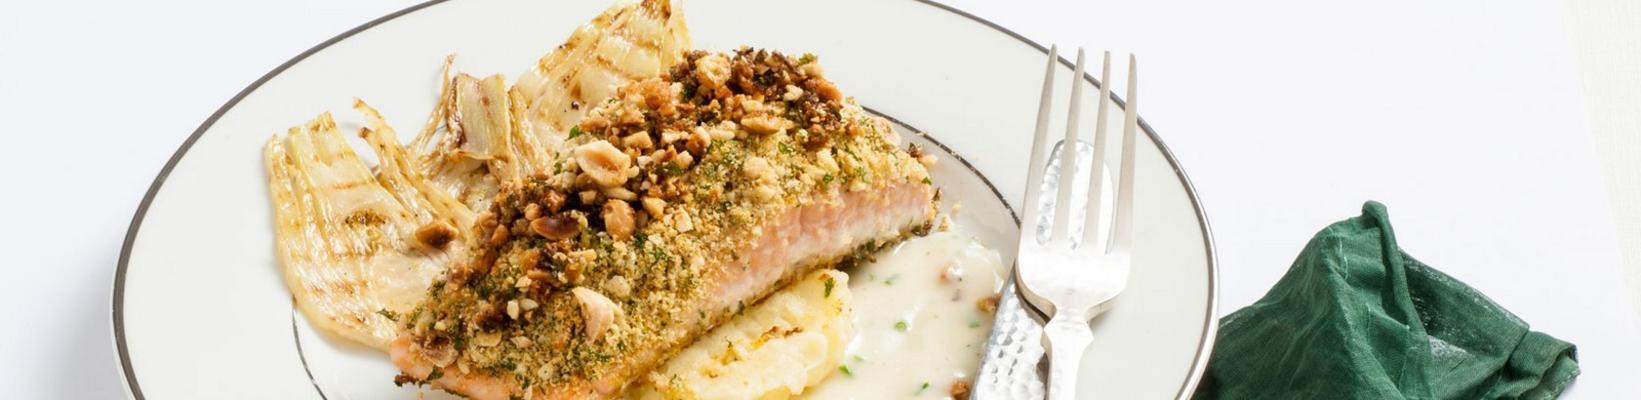 salmon fillet with nut crust